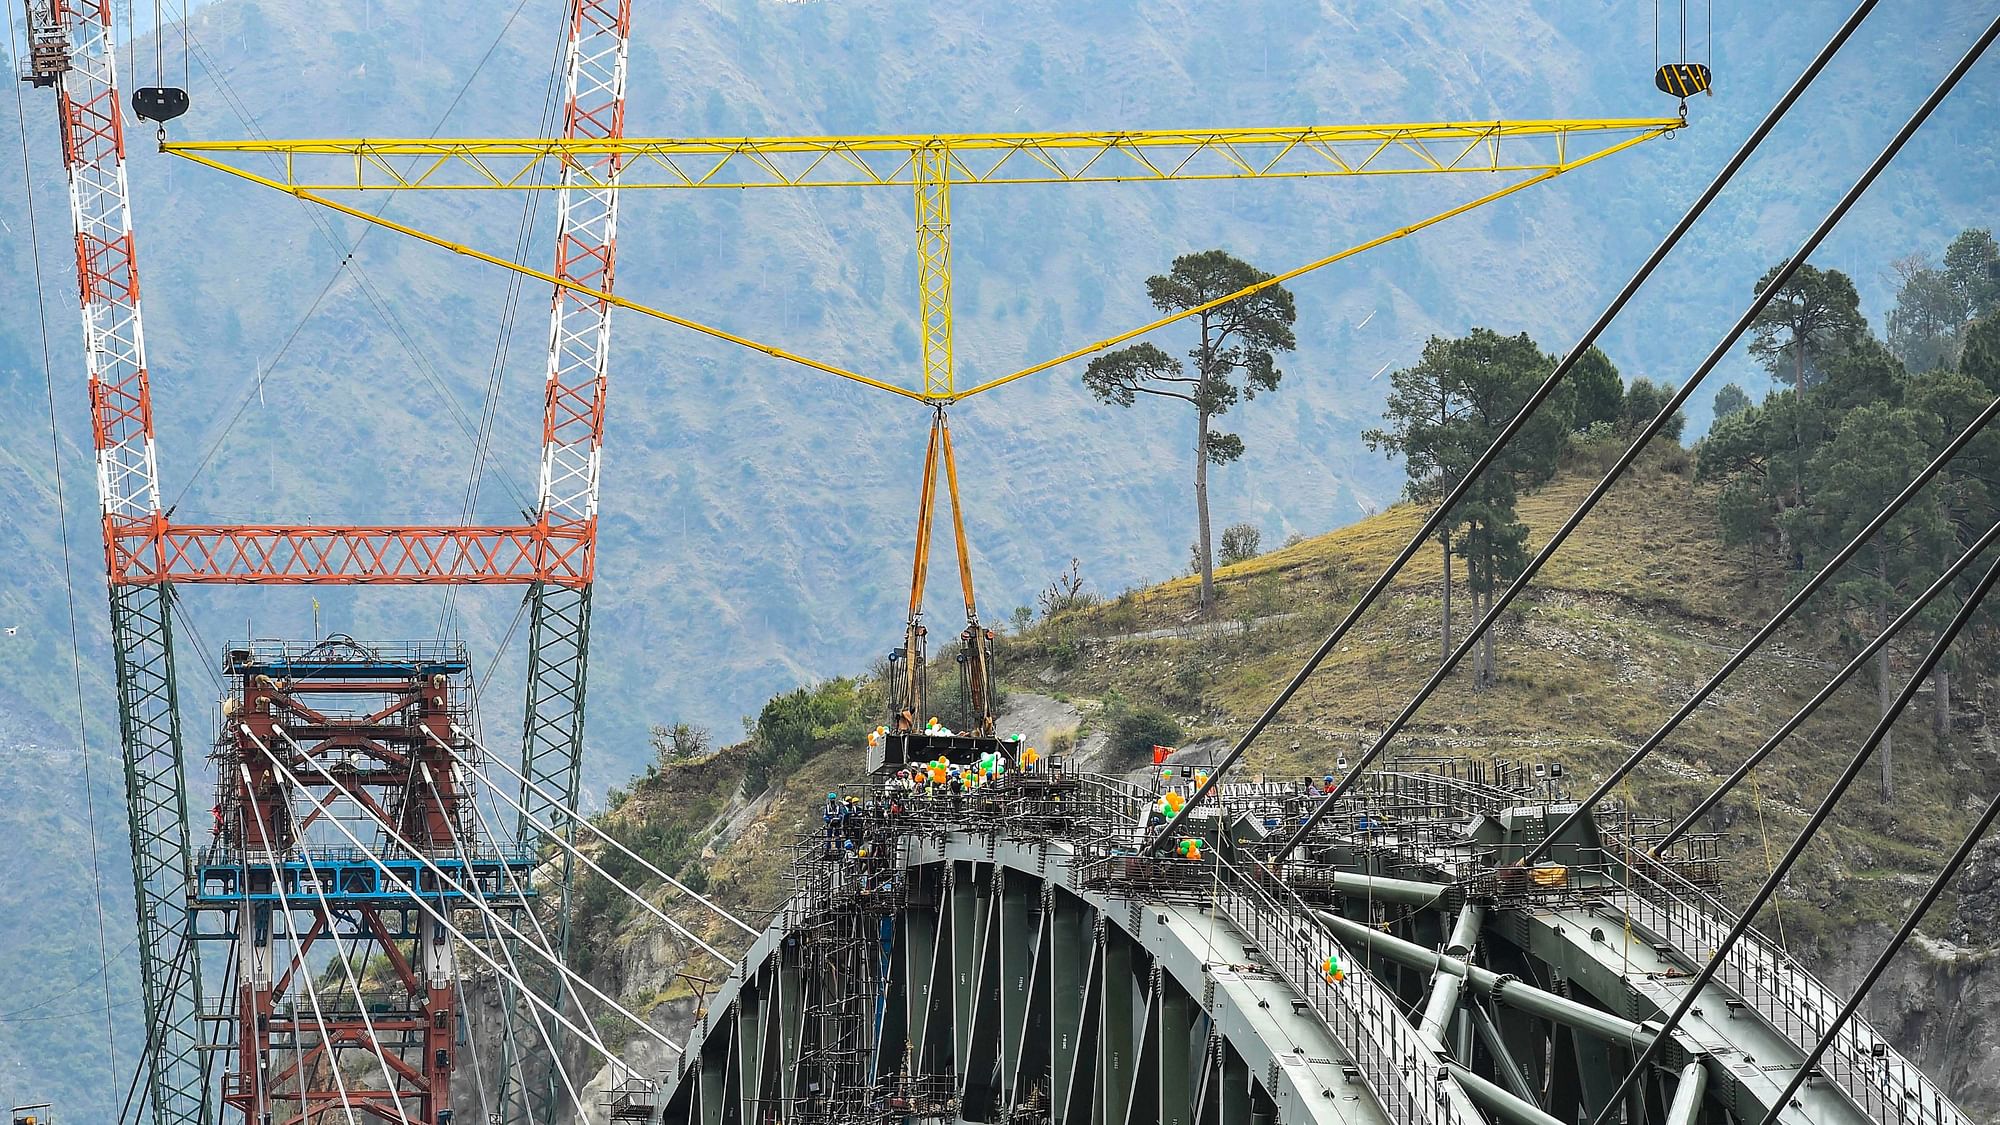 Construction of the arch for the world’s highest railway bridge, over river Chenab nears completion, in Chenab, Monday, 5 April, 2021.